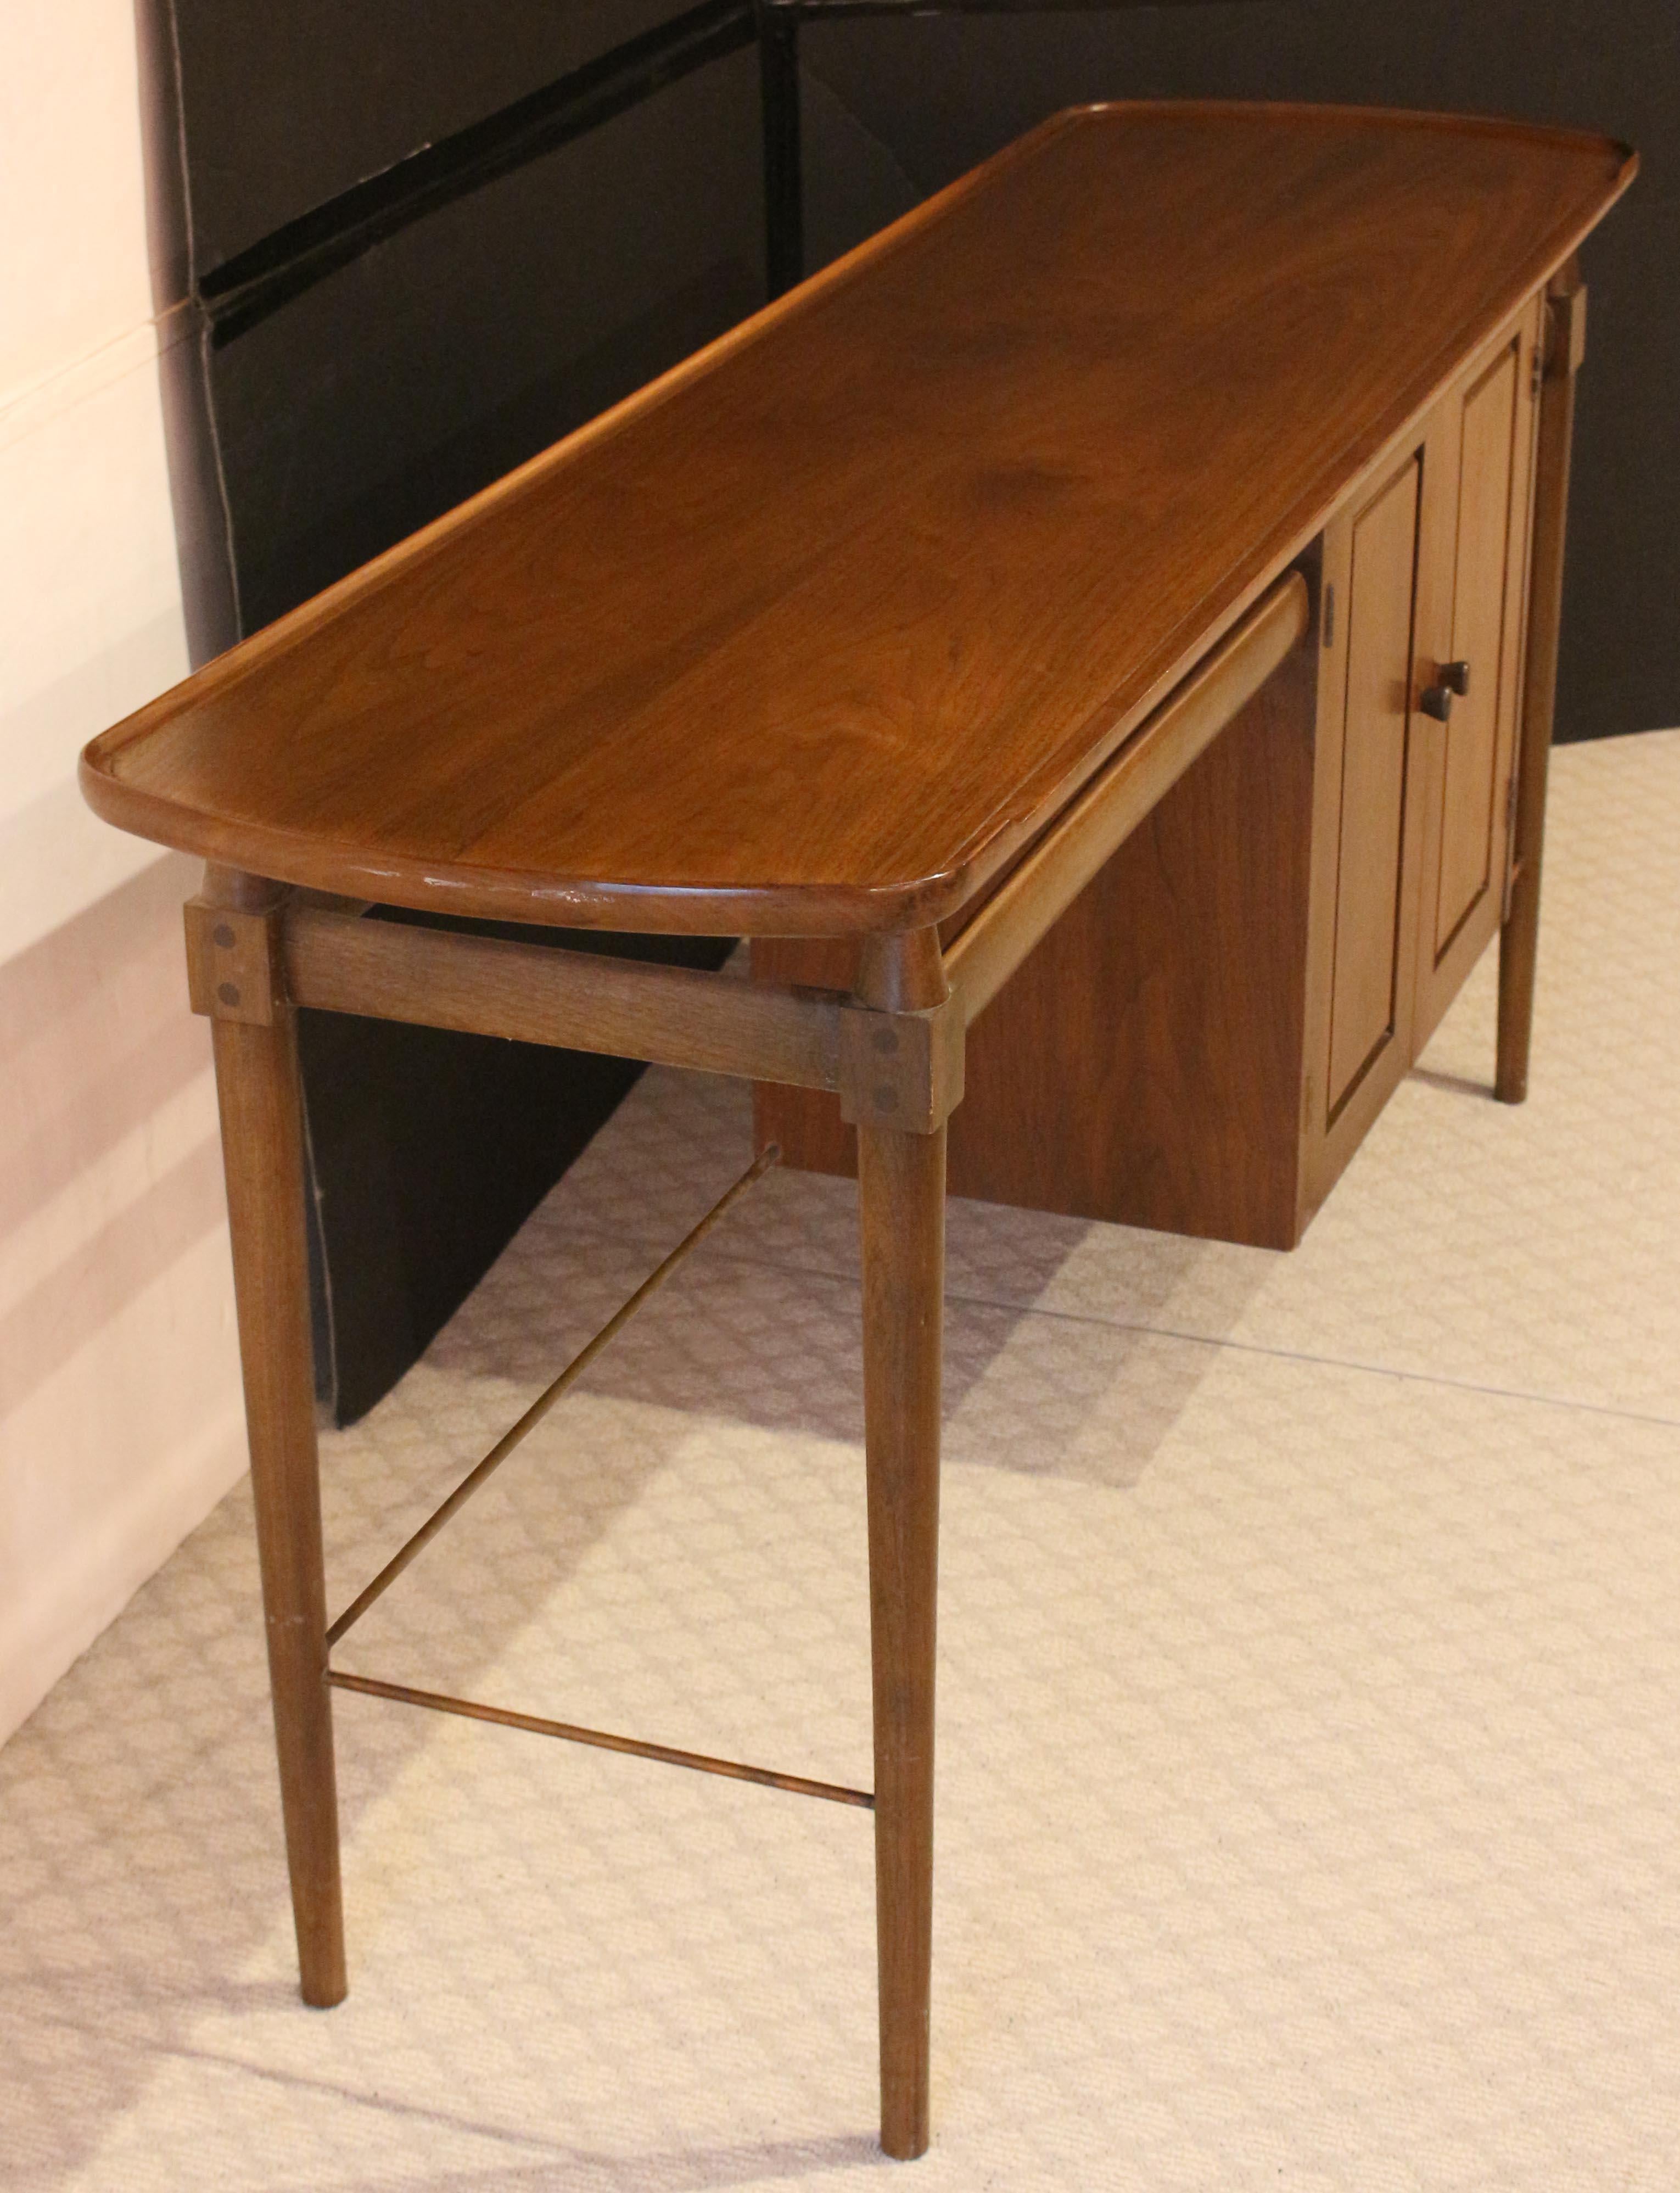 20th Century Mid Century Modern Writing Table Desk, American, c.1960s For Sale